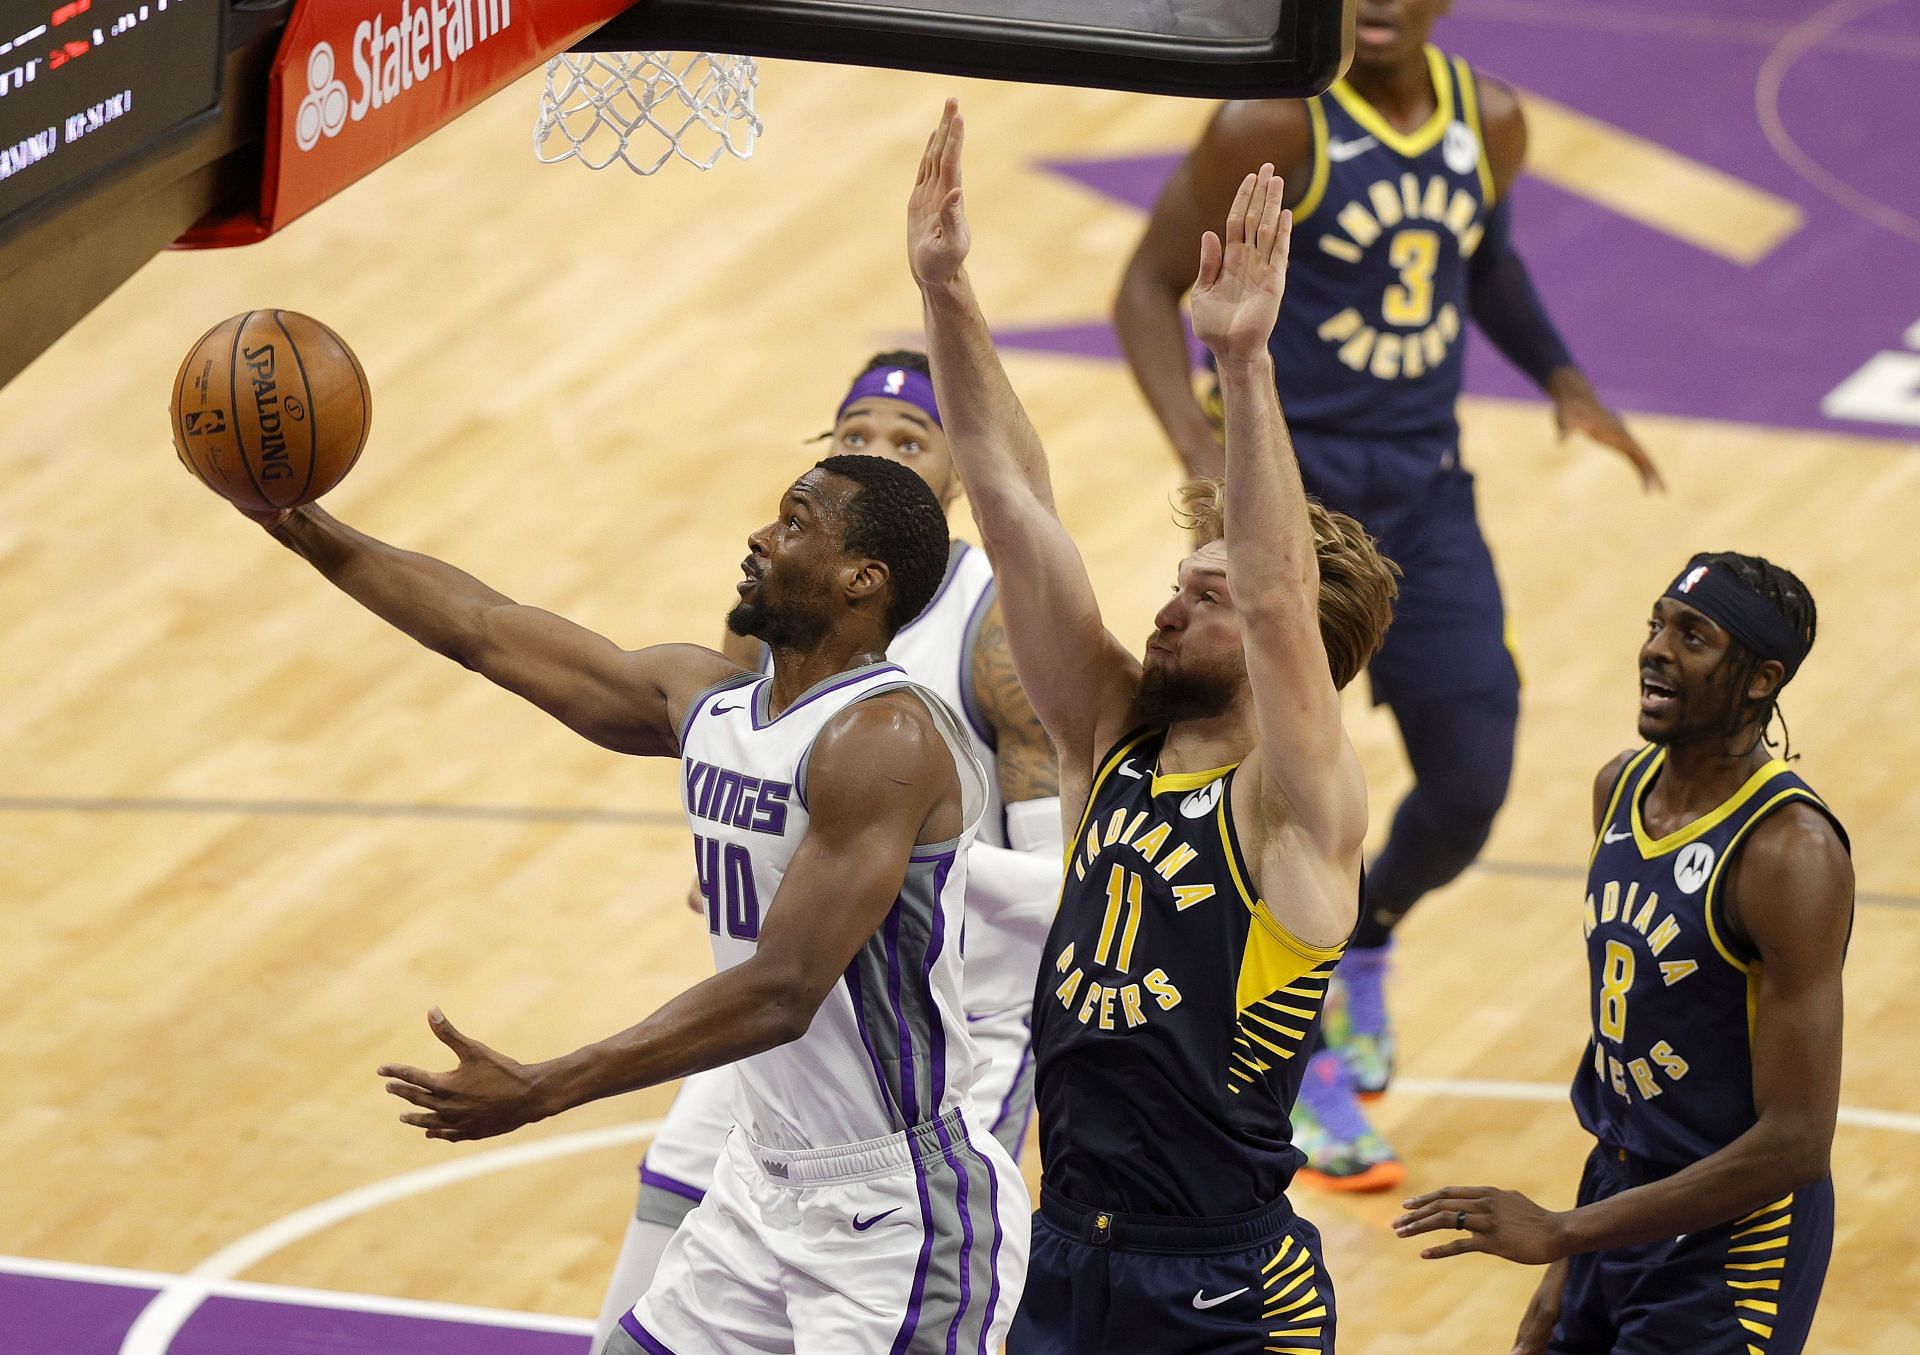 Harrison Barnes of the Sacramento Kings drives by the Indiana Pacers.